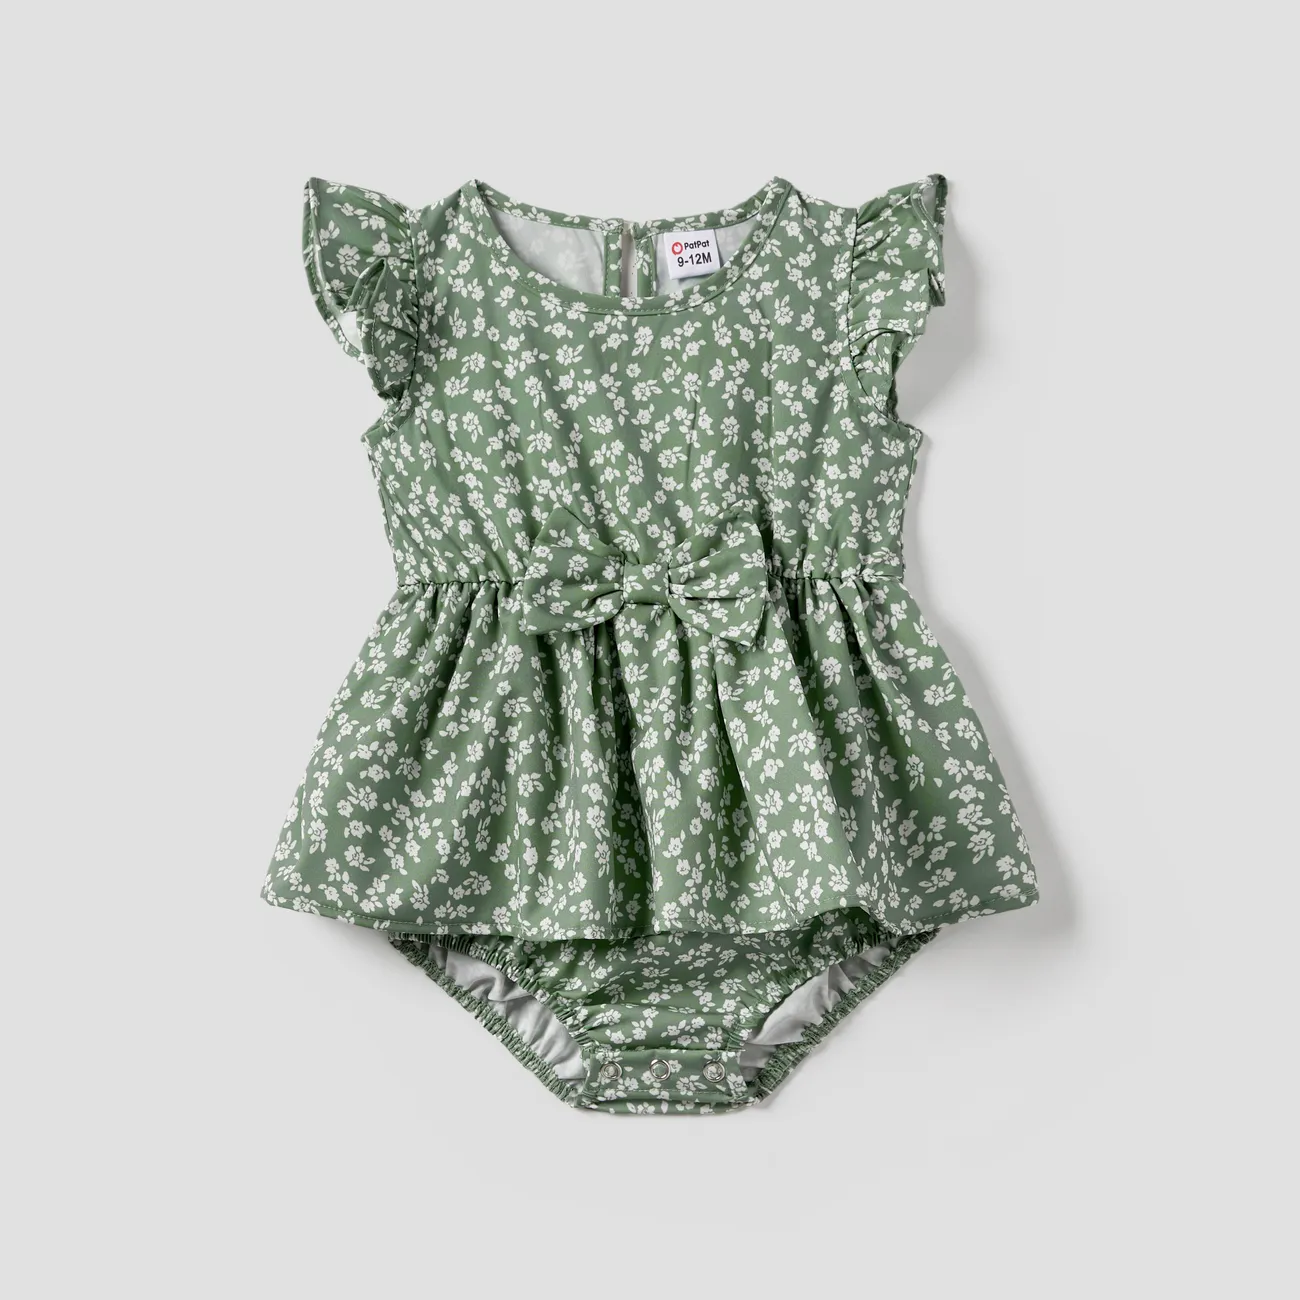 Family Matching Color Block Tee and Ditsy Floral Tie Side Strap Dress Sets greenwhite big image 1